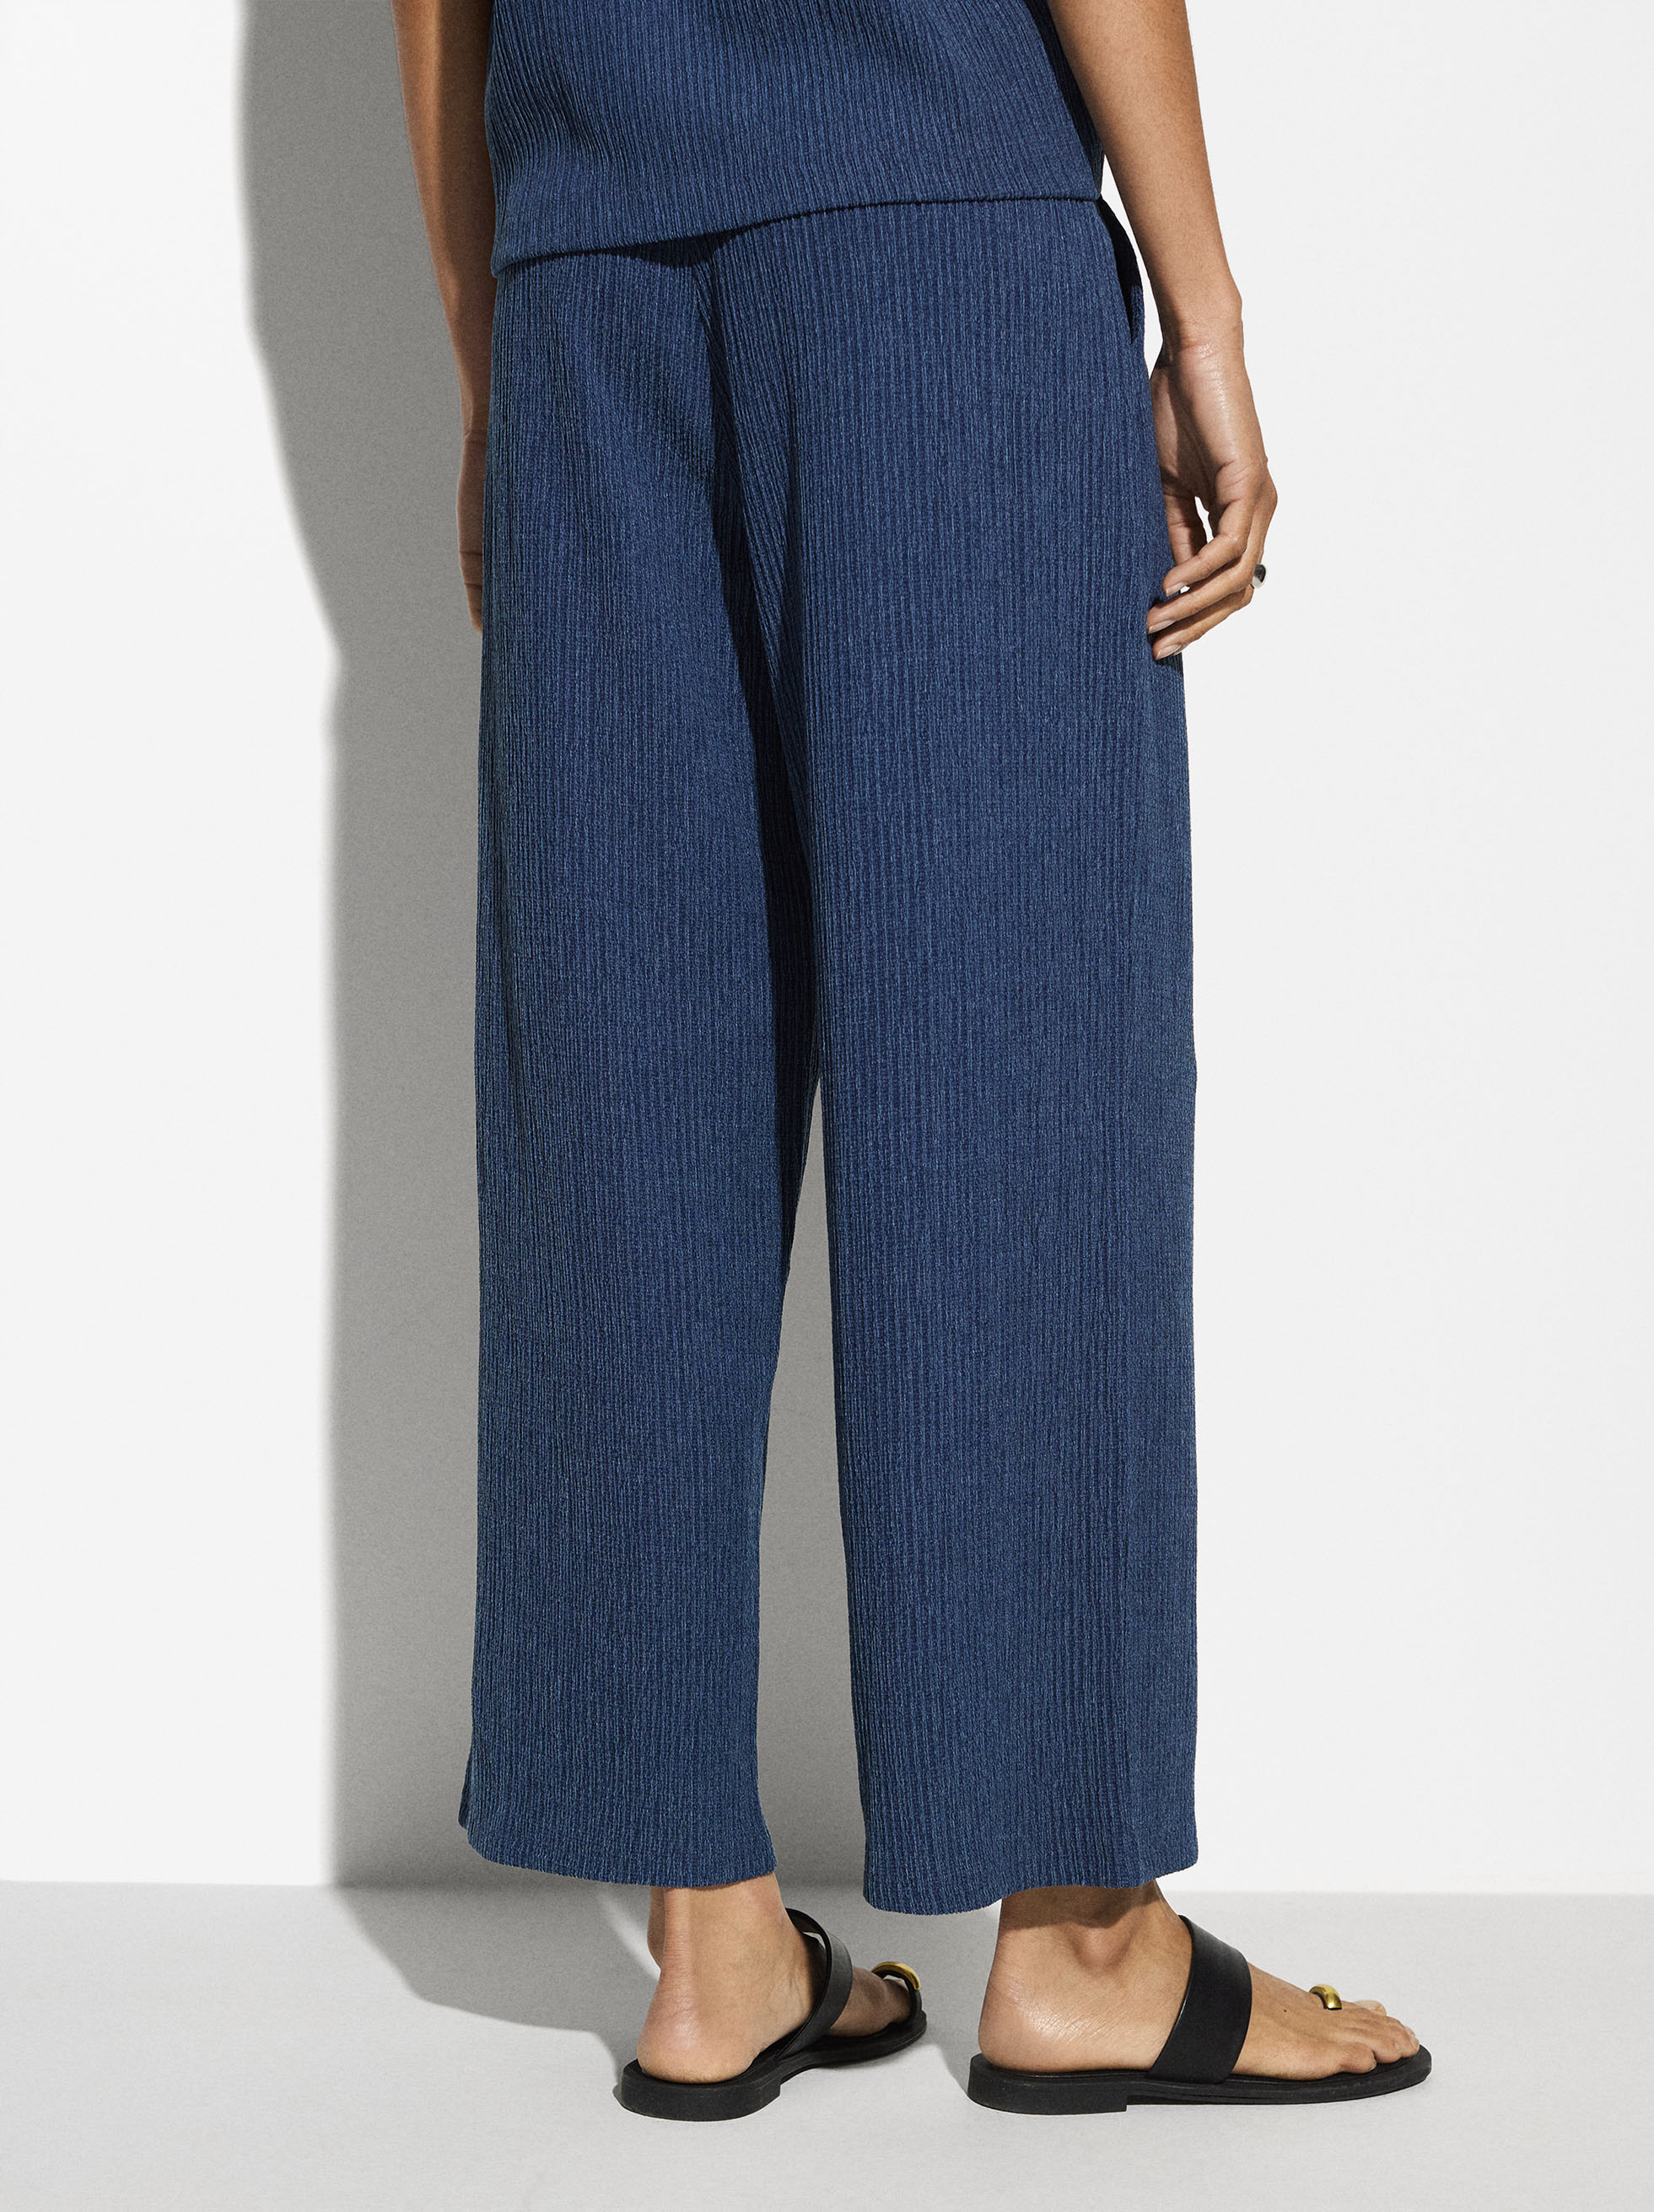 Textured Pants With Elastic Waistband image number 4.0